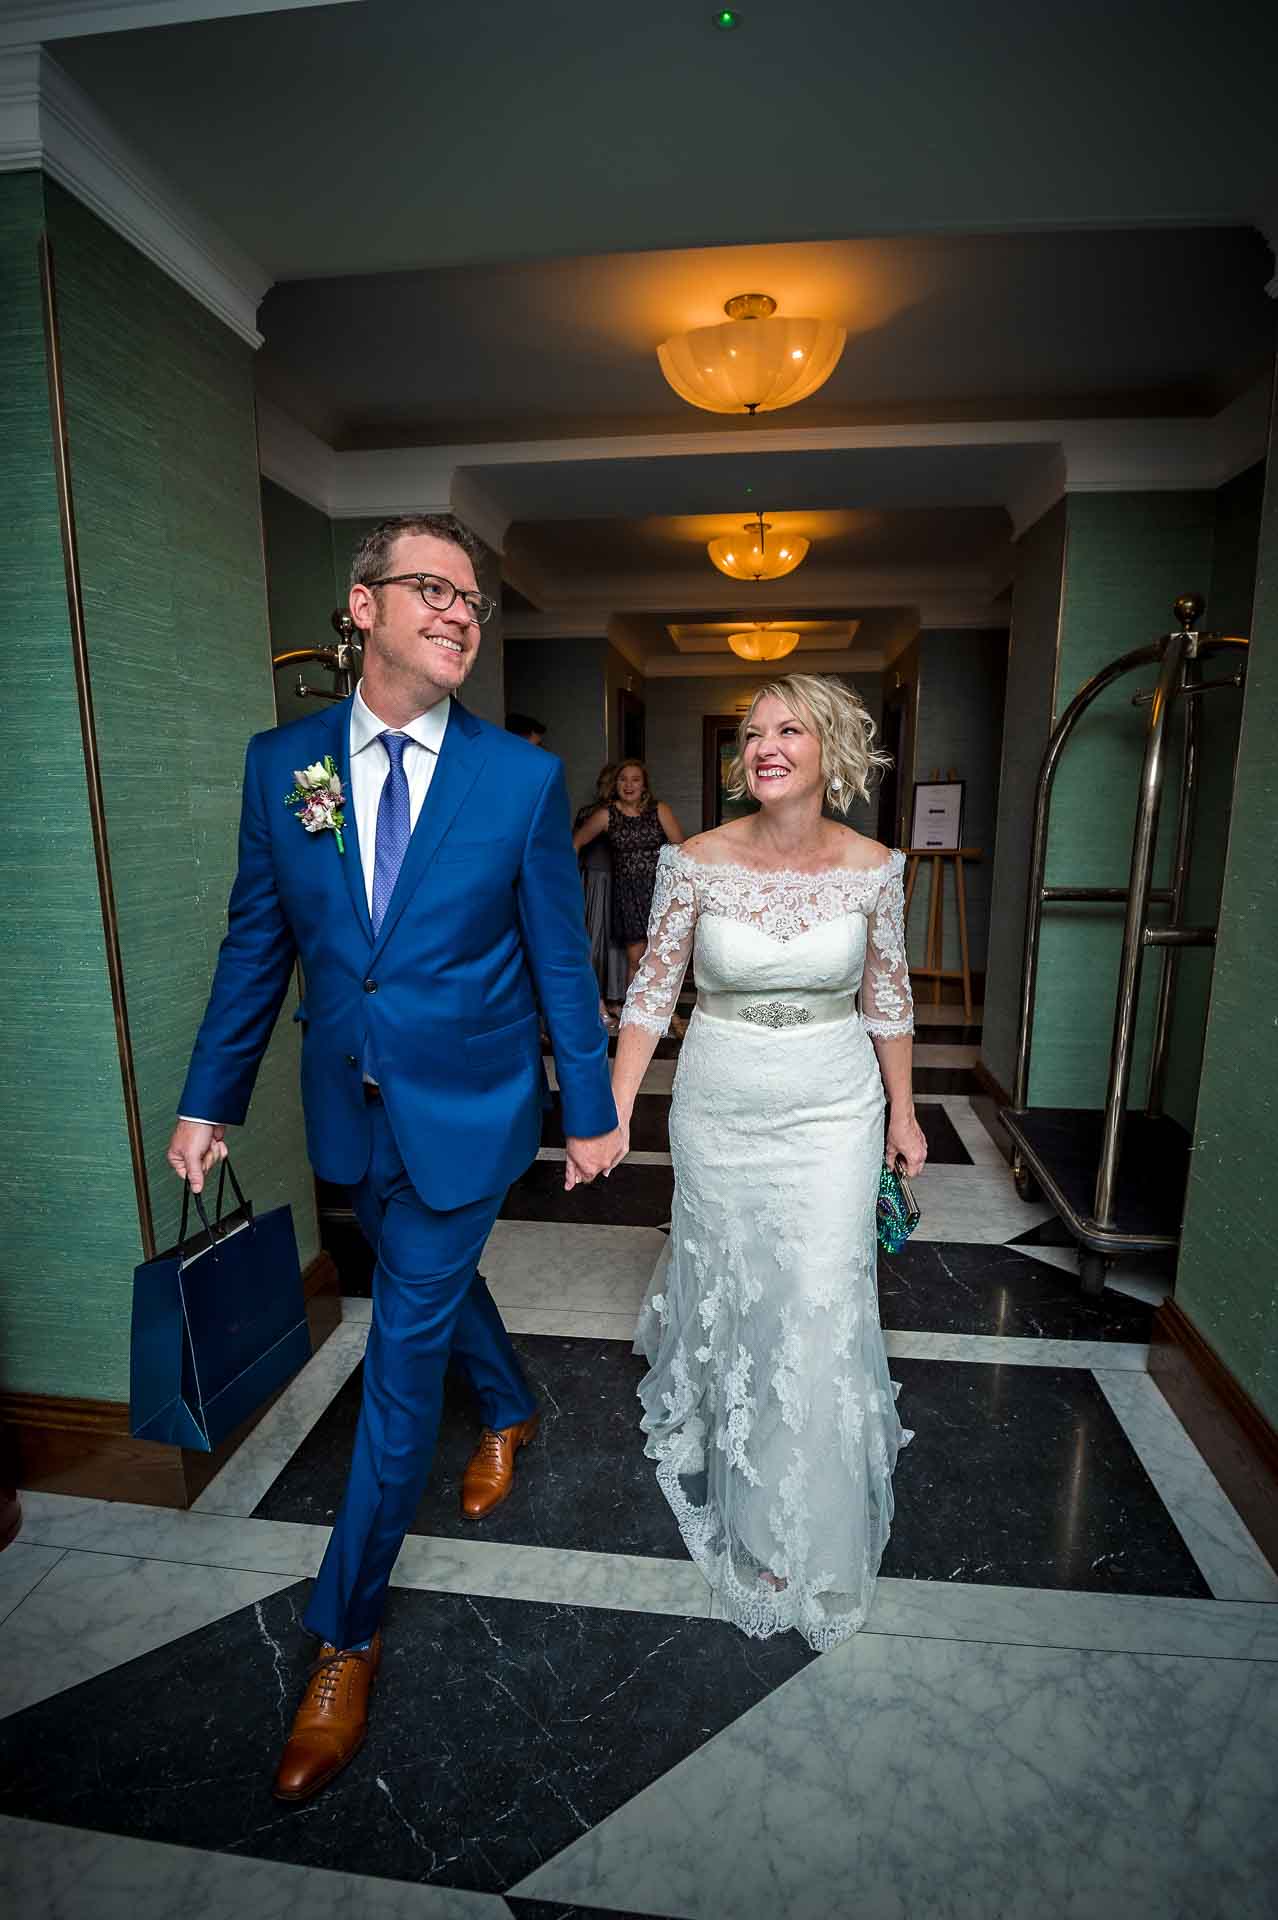 Bride and groom smiling as they walk along in hotel reception